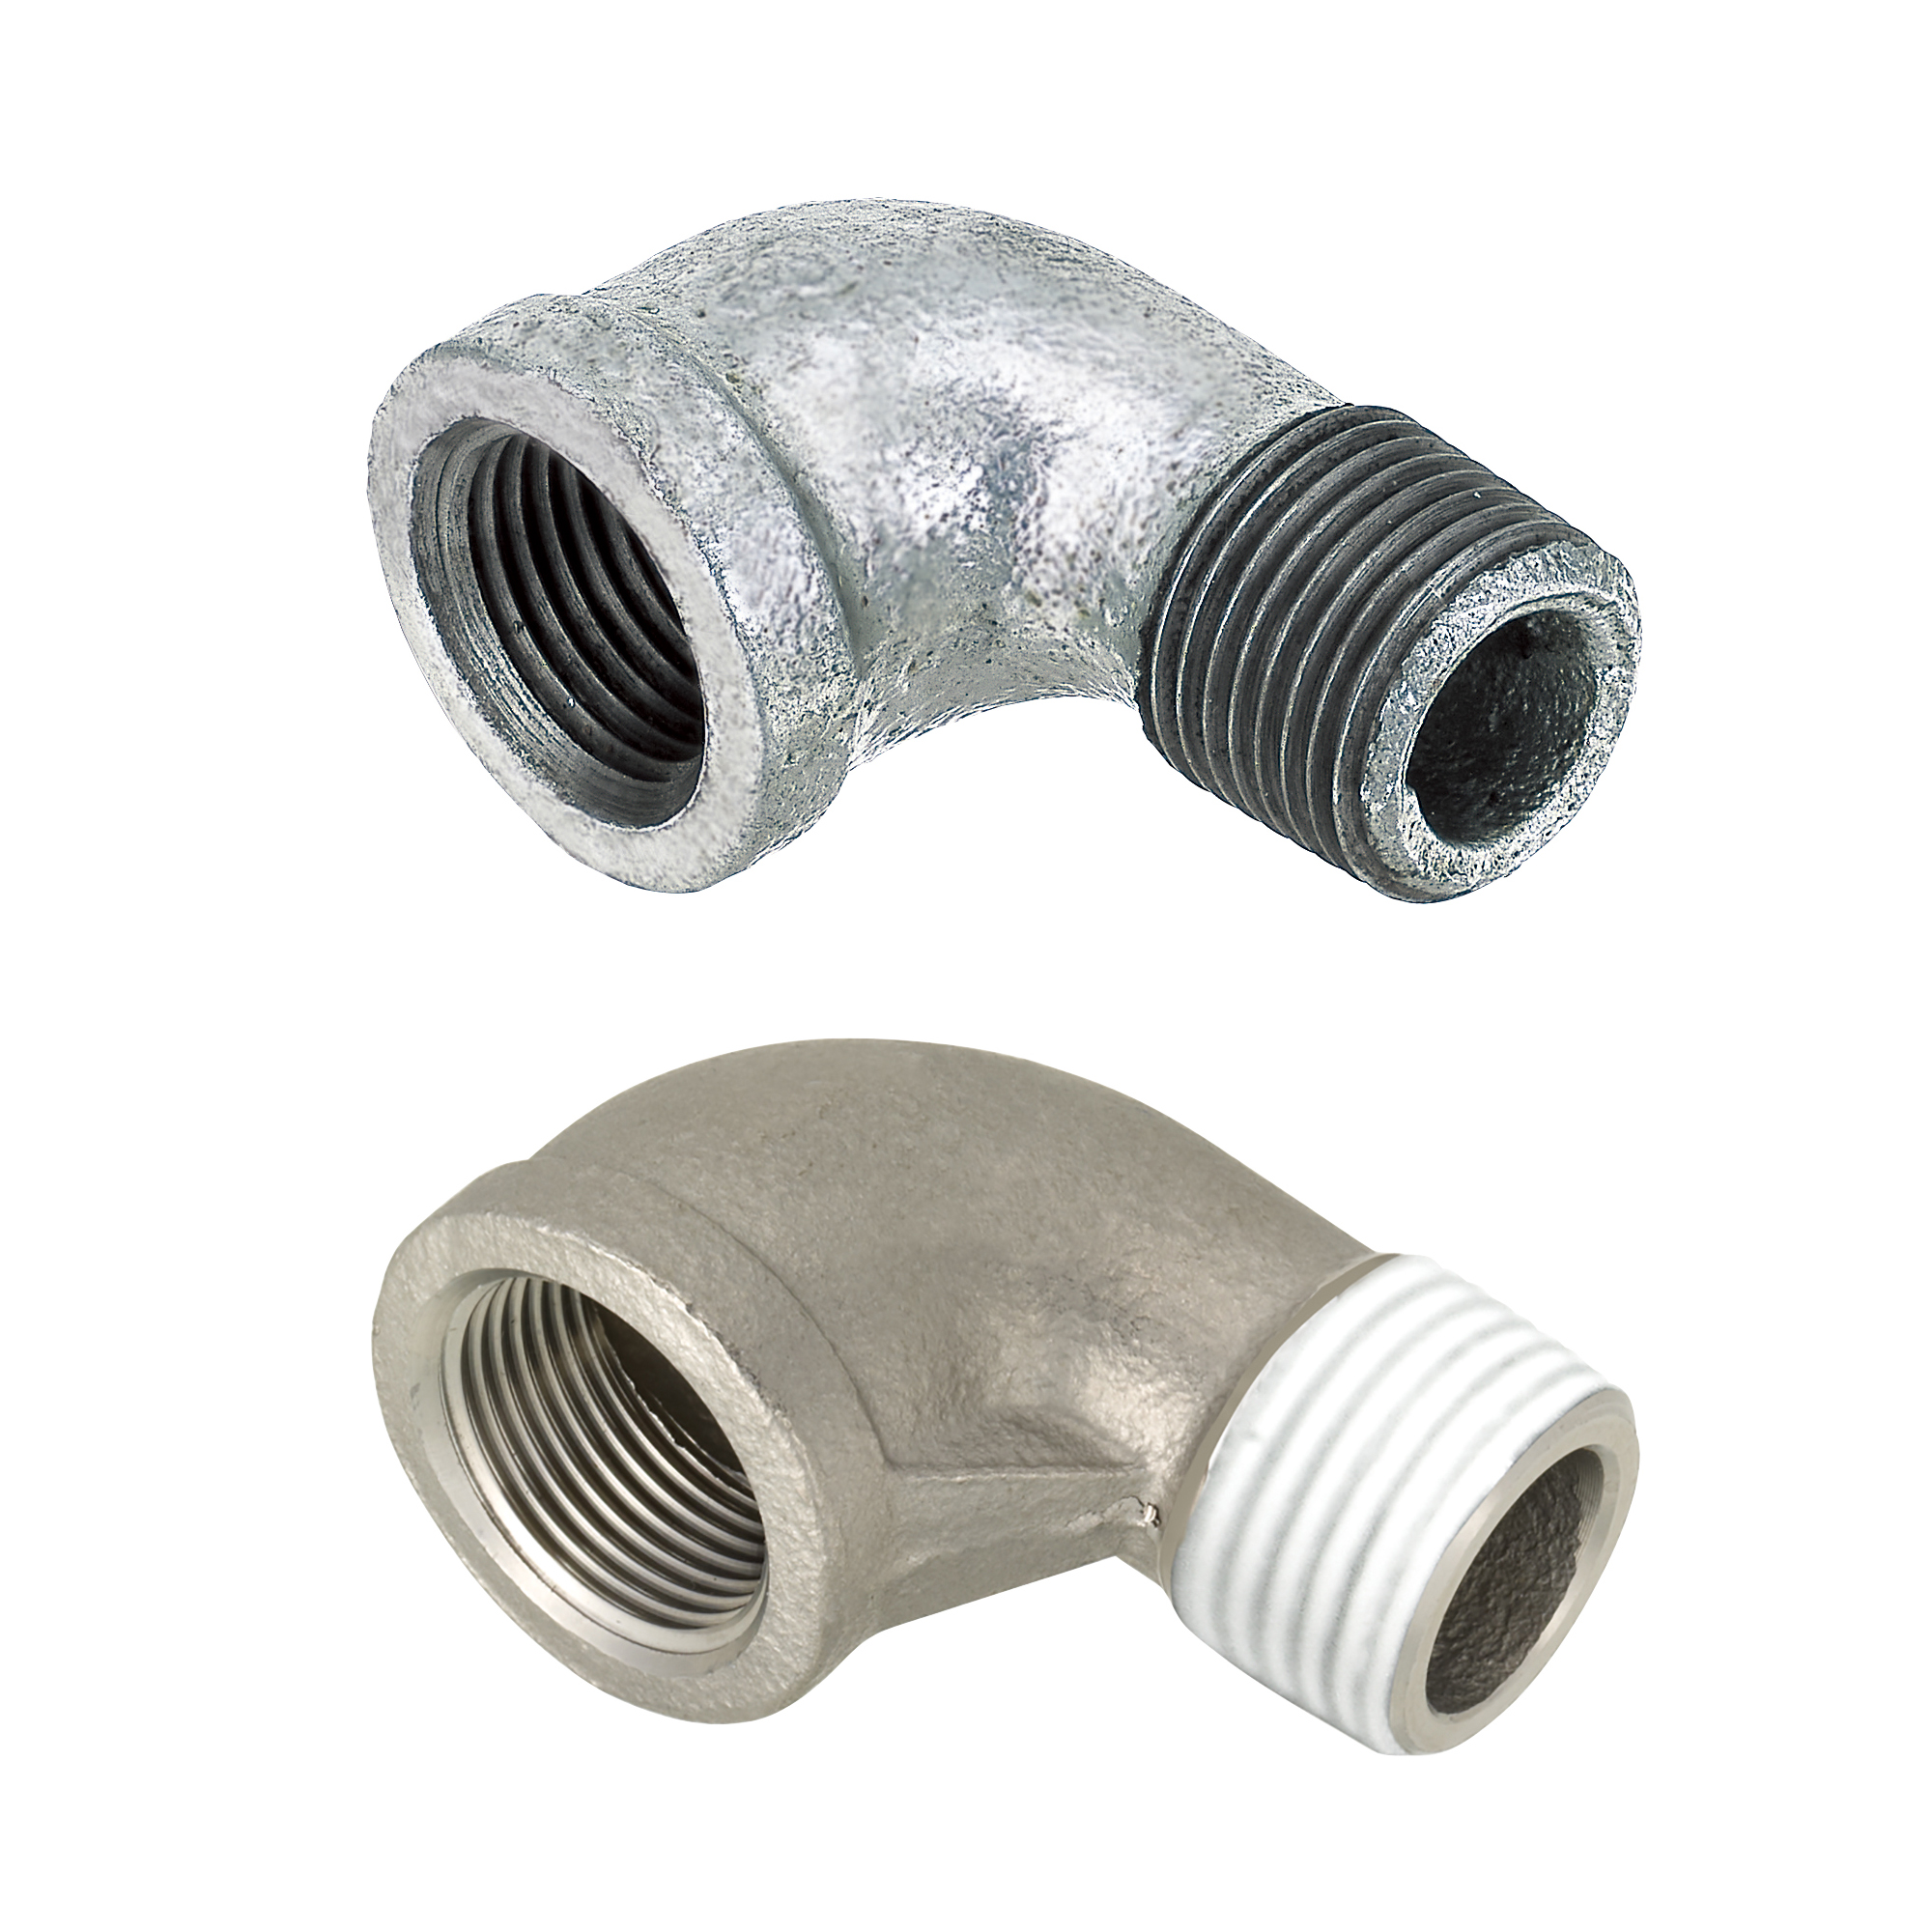 Low Pressure Fittings/90 Deg. Elbow/Threaded and Tapped (SGPPEL20A) 